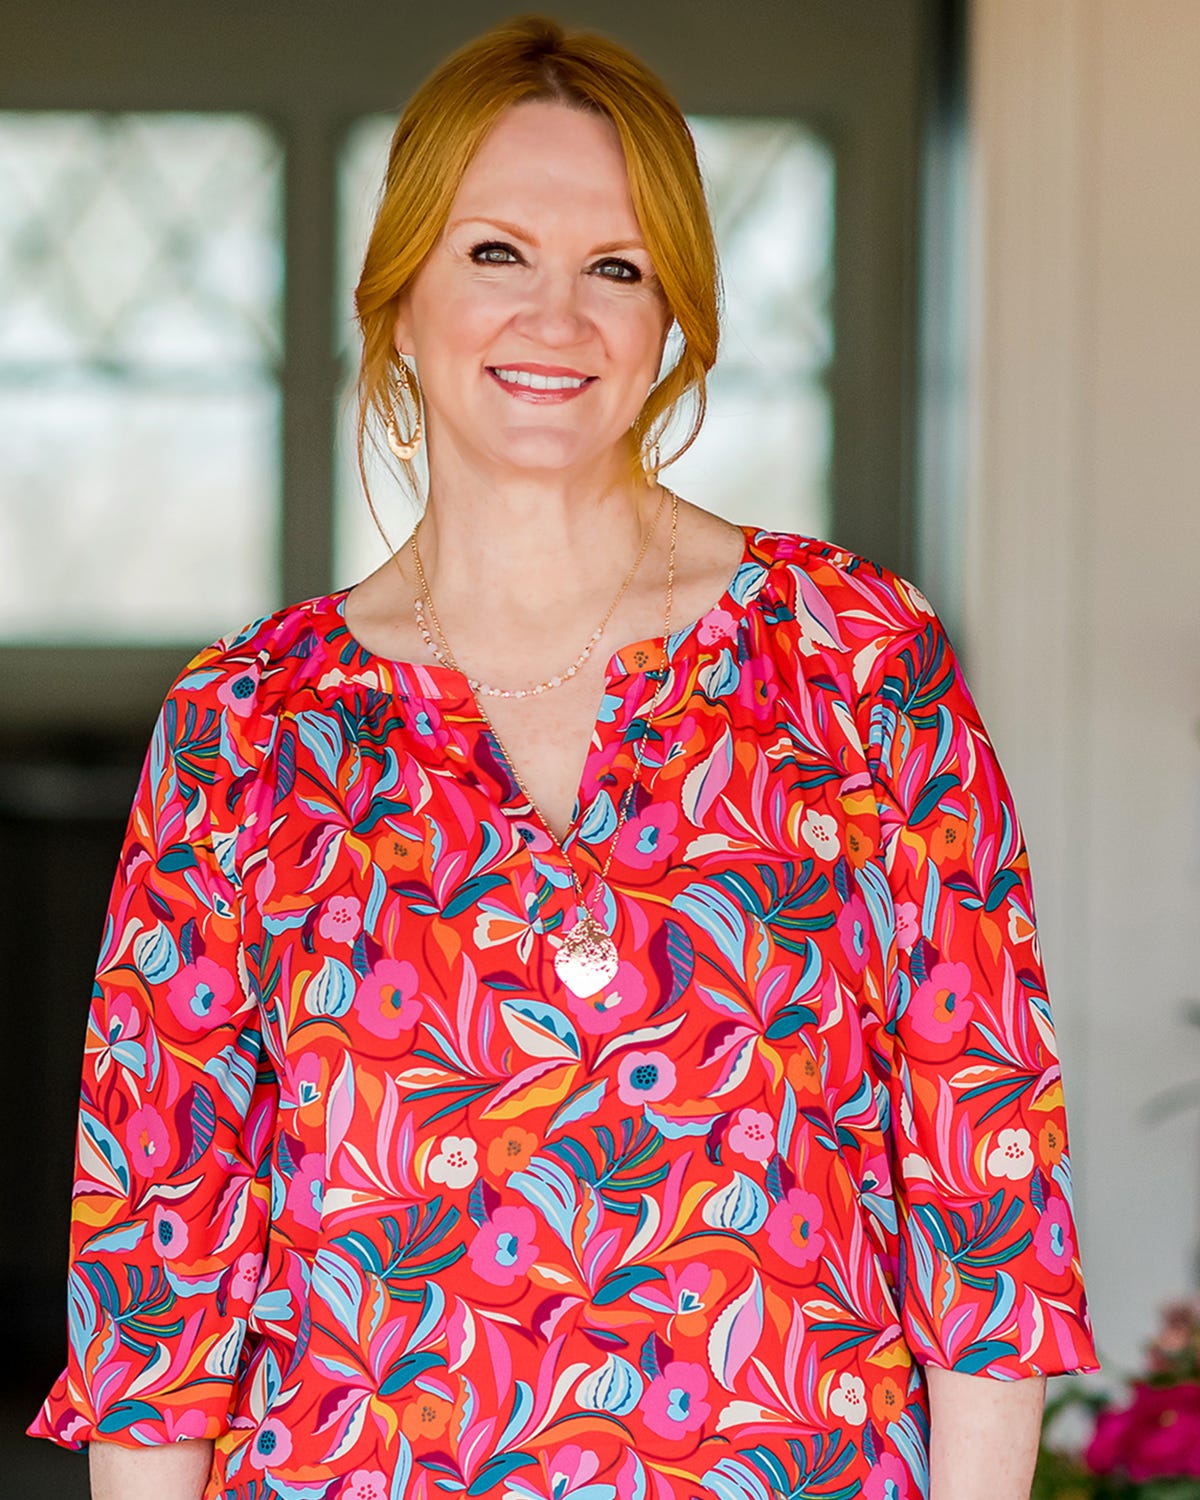 There's a Major Sale on Ree Drummond's Dresses